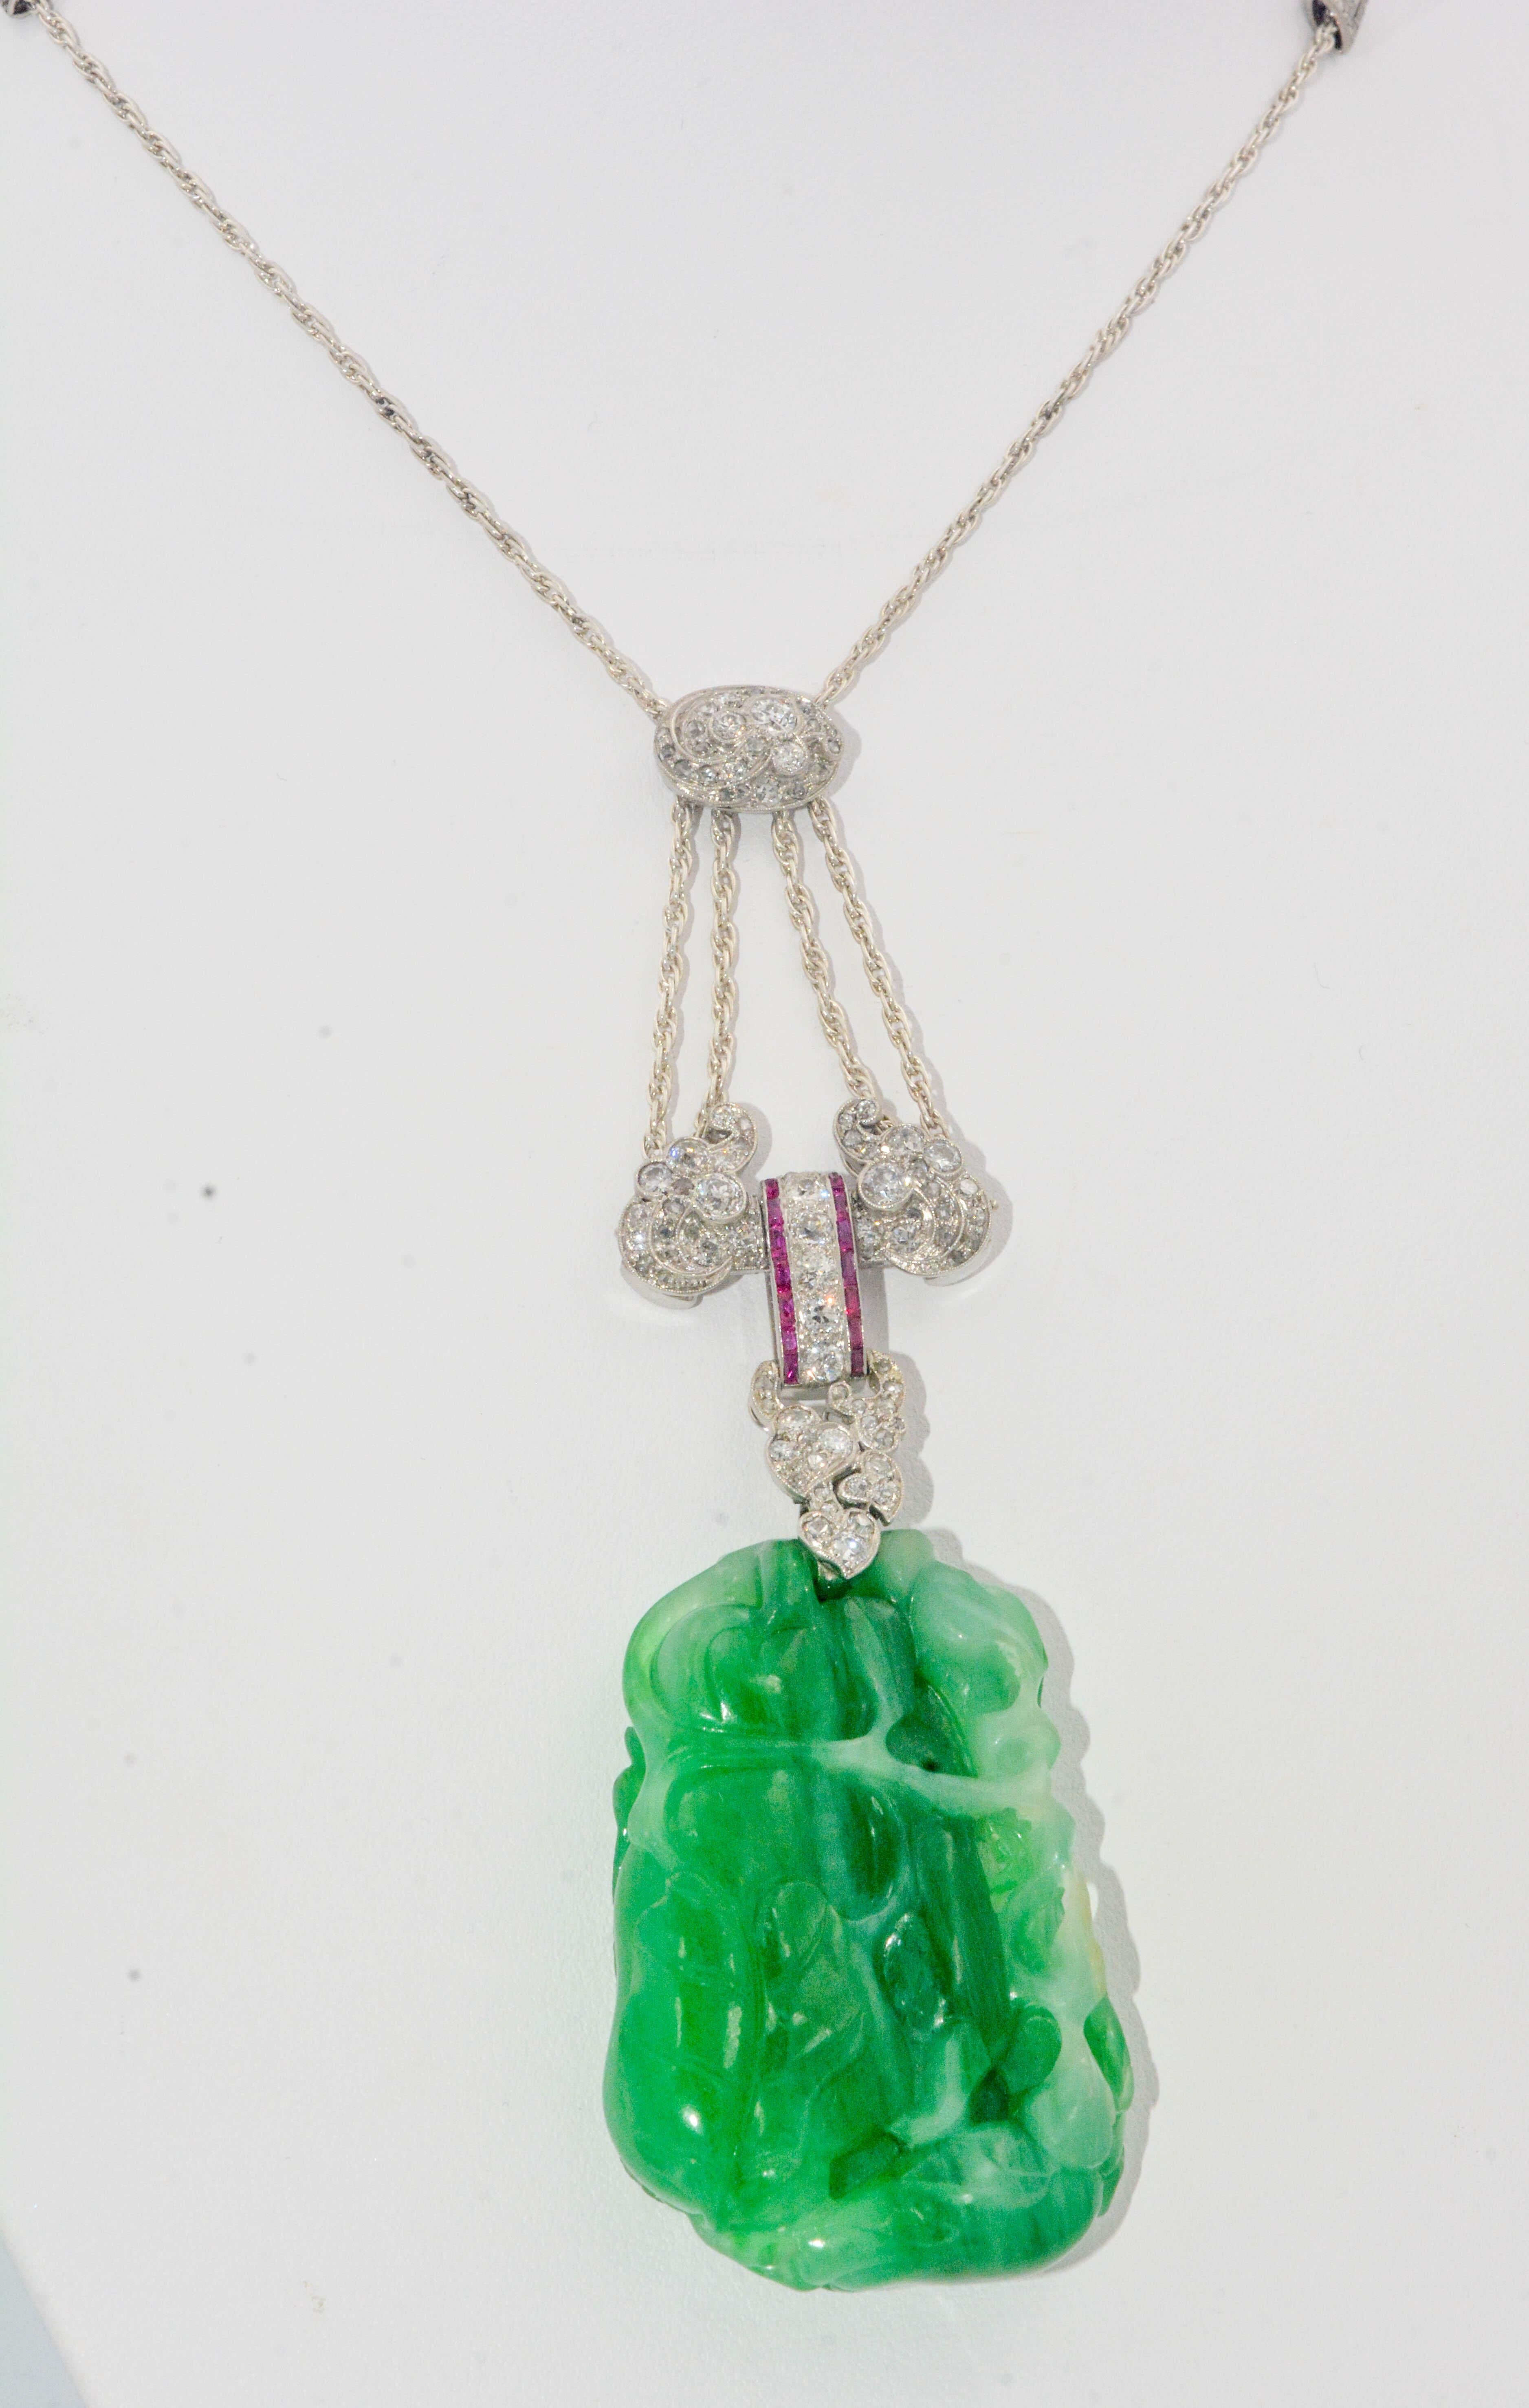 Presenting  this divine Art Deco Circa 1930 platinum necklace with a carved jadeite pendant. High quality jade is carved with banana leaves. Bagguette rubies 0.24 ctw are surrounded by Old European and Rose cut diamonds 1.51 ctw (G-H color, SI